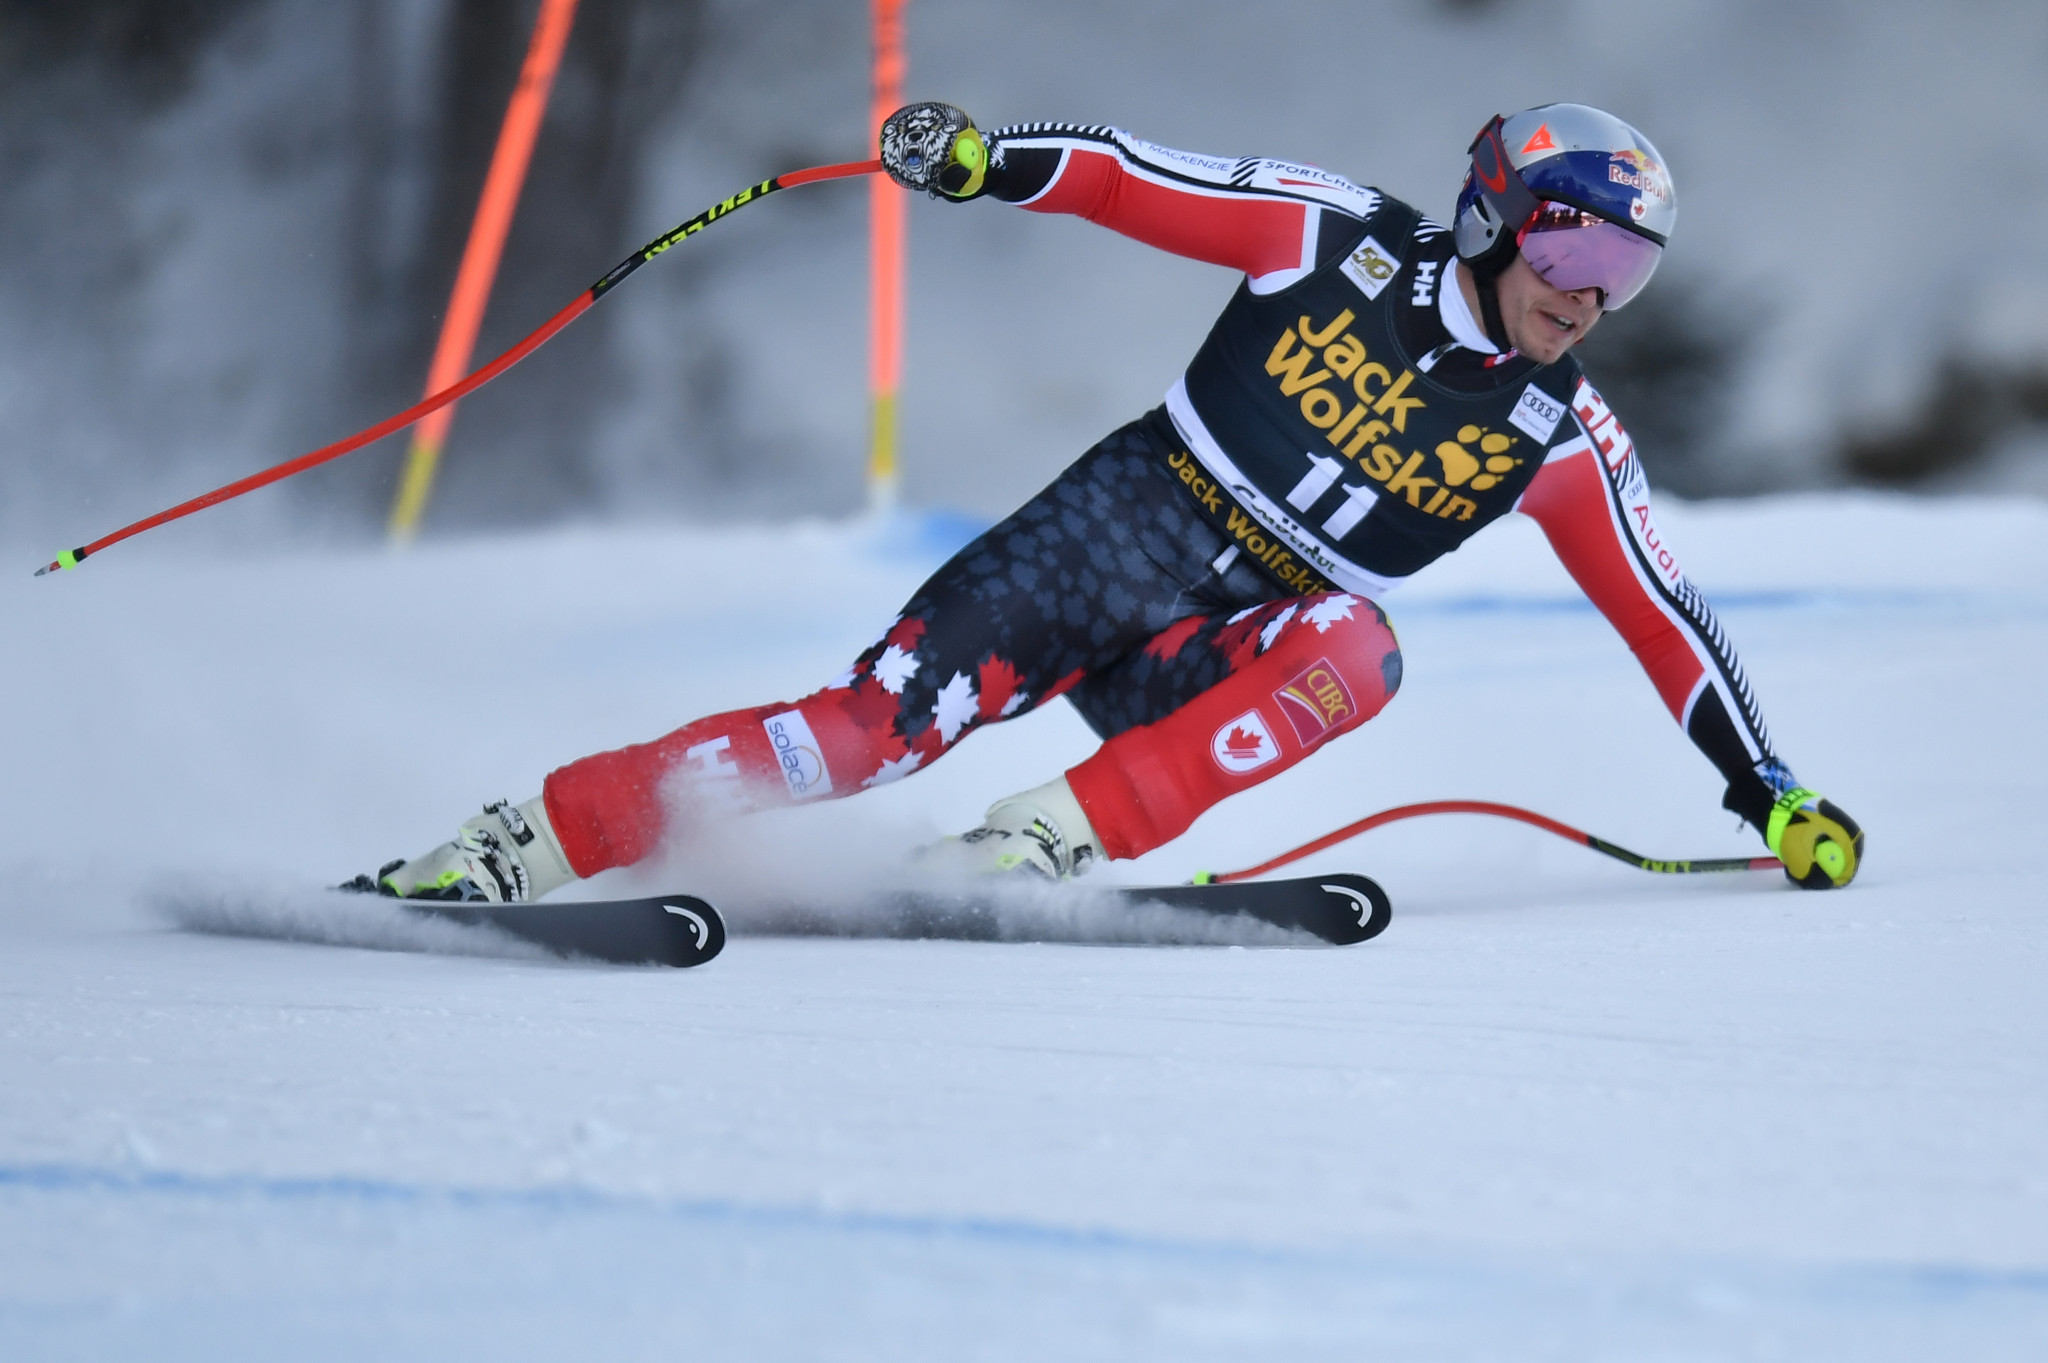 Double world champion Erik Guay takes his place on the Board ©Alpine Canada